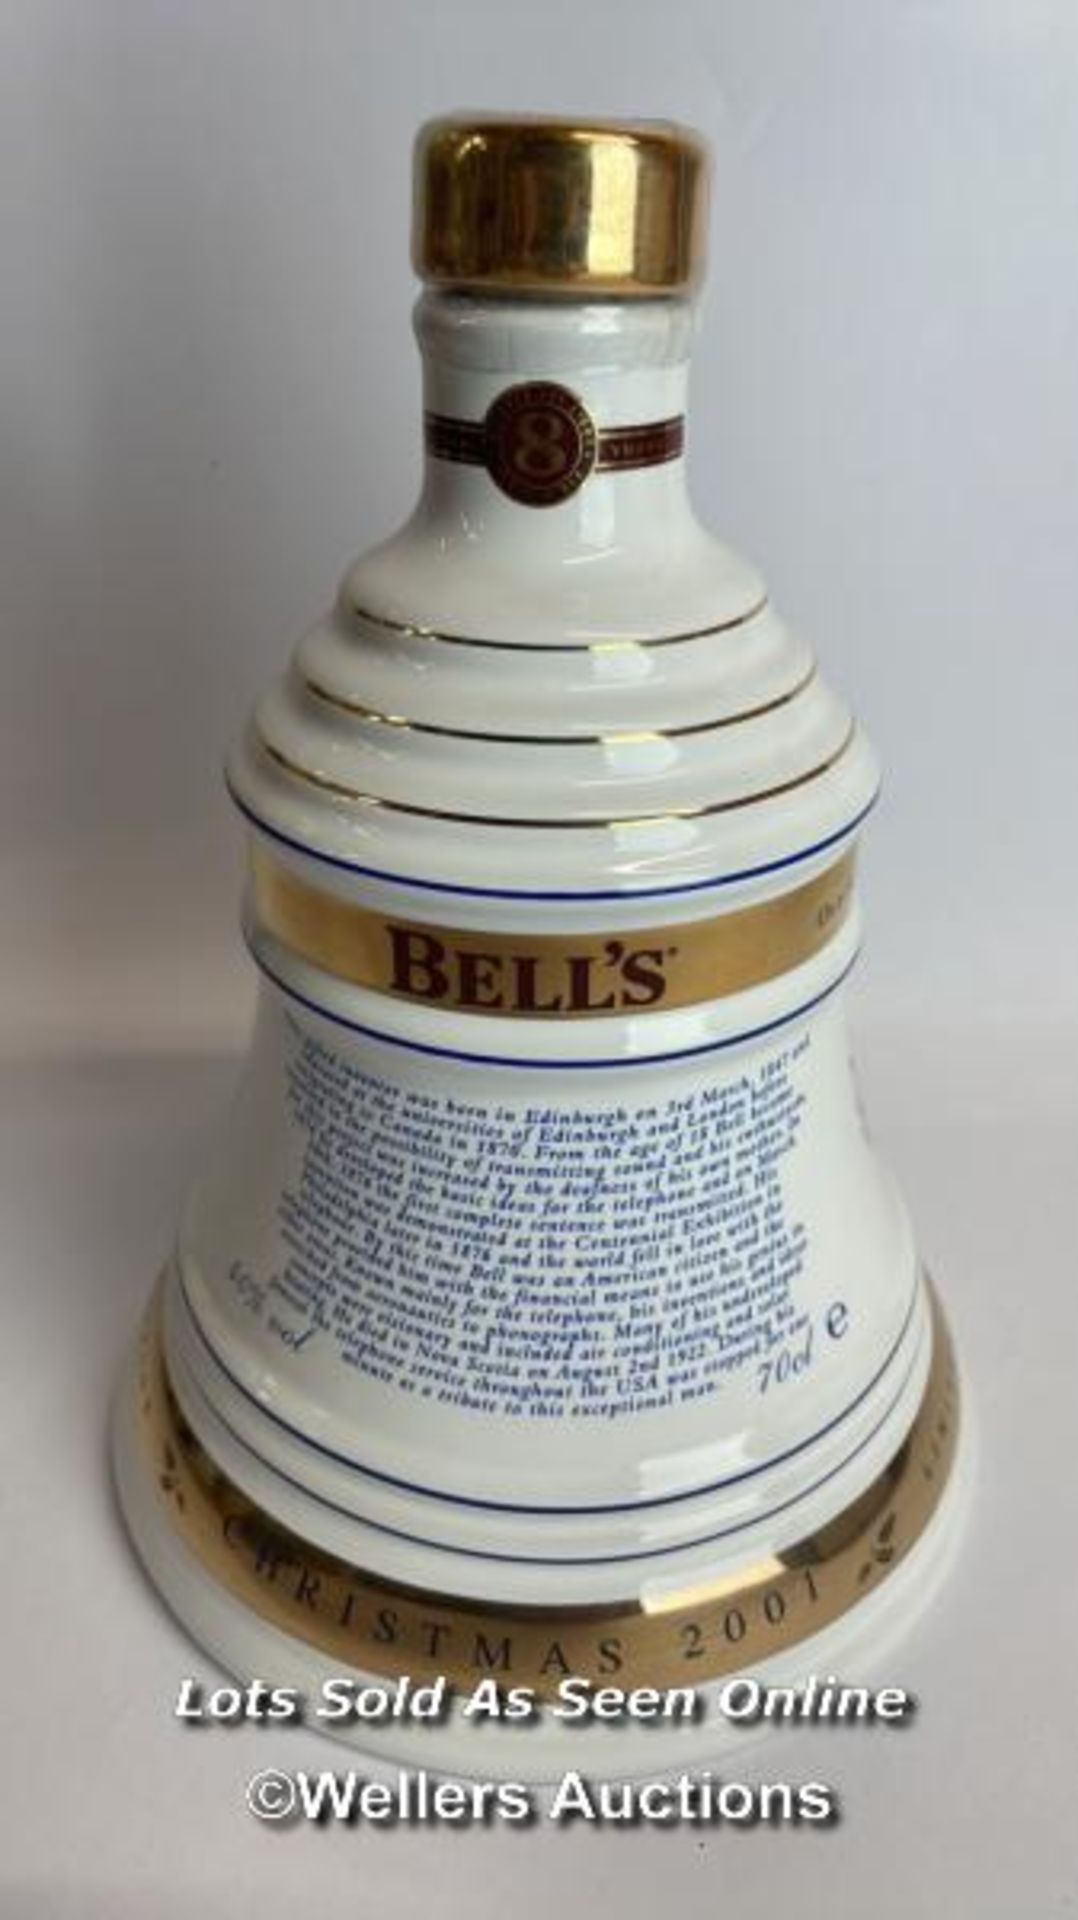 Bell's 2001 Old Scotch Whisky Limited Edition Christmas Decanter, Aged 8 Years, Brand New and Boxed, - Image 5 of 10